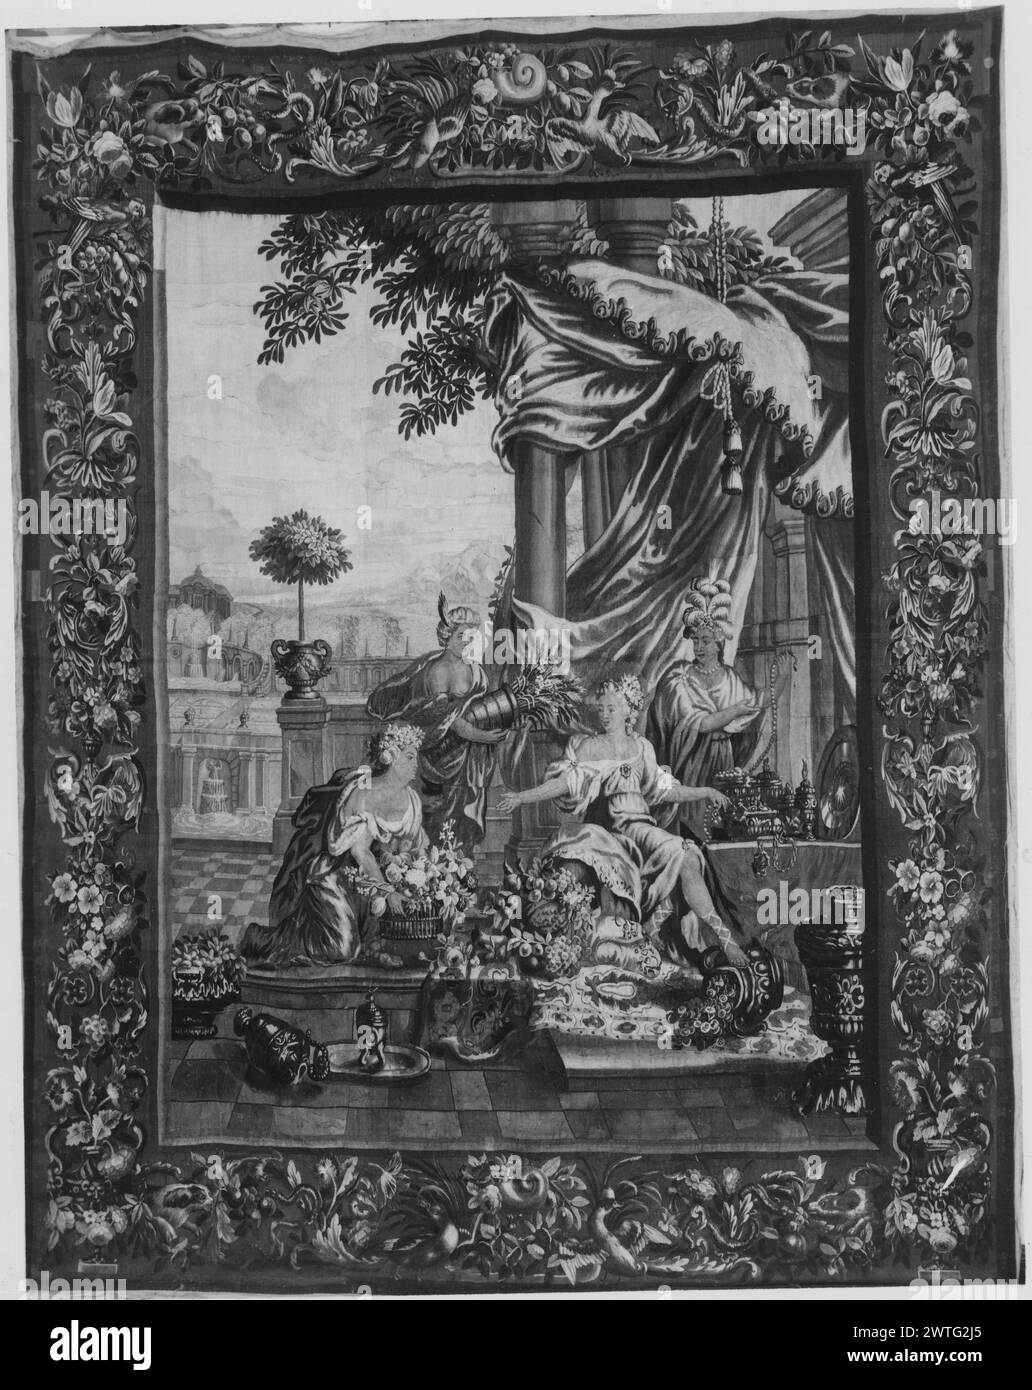 Abundance. Schoor, Lodewijk van (Flemish, 1666-1726) (author of design, figures) [painter] Spierincx, Pieter (Flemish, act.1614-1647) (author of design, landscape workshop) [painter weaver] c. 1699 Tapestry Dimensions: H 11'4' x W 8'8' Tapestry Materials/Techniques: unknown Culture: Flemish Weaving Center: unknown Ownership History: French & Co. On terrace, personification of Abundance seated with right foot resting on vessel filled with coins, surrounded by 3 attendants, 1 kneeling & holding basket of flowers, 1 carrying cornucopia, another with feather headdress standing by table with vessel Stock Photo